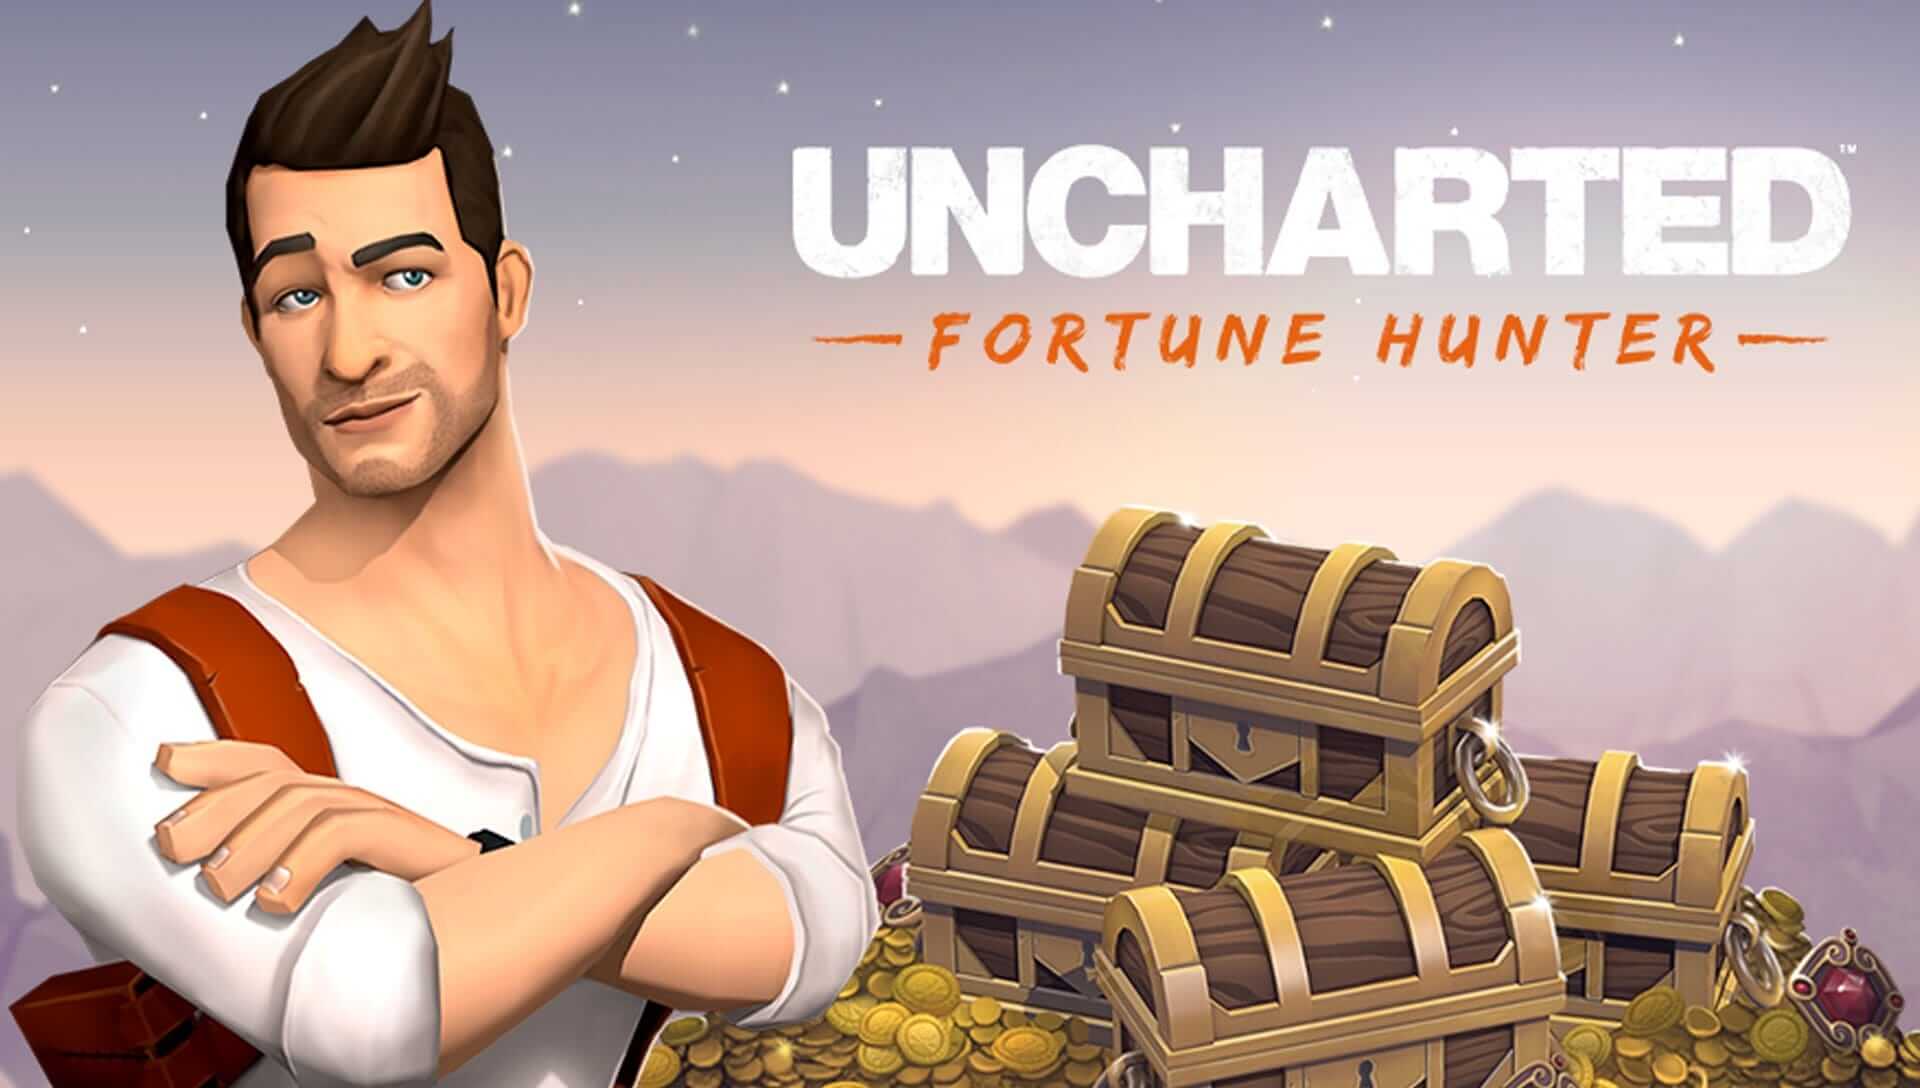 Uncharted Fortune Hunter astuce triche